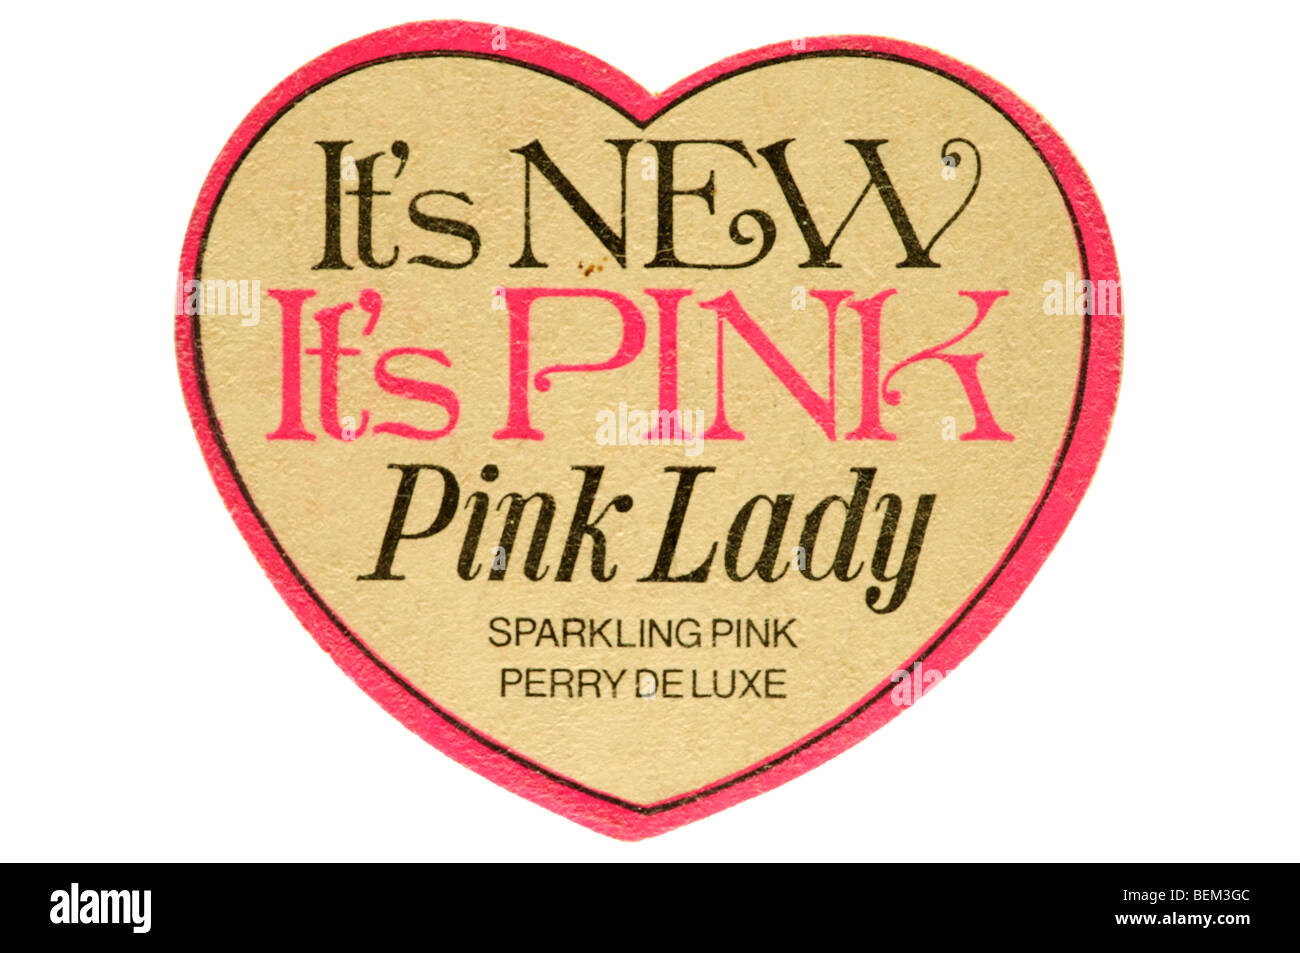 its new its pink pink lady sparkling pink perry deluxe Stock Photo